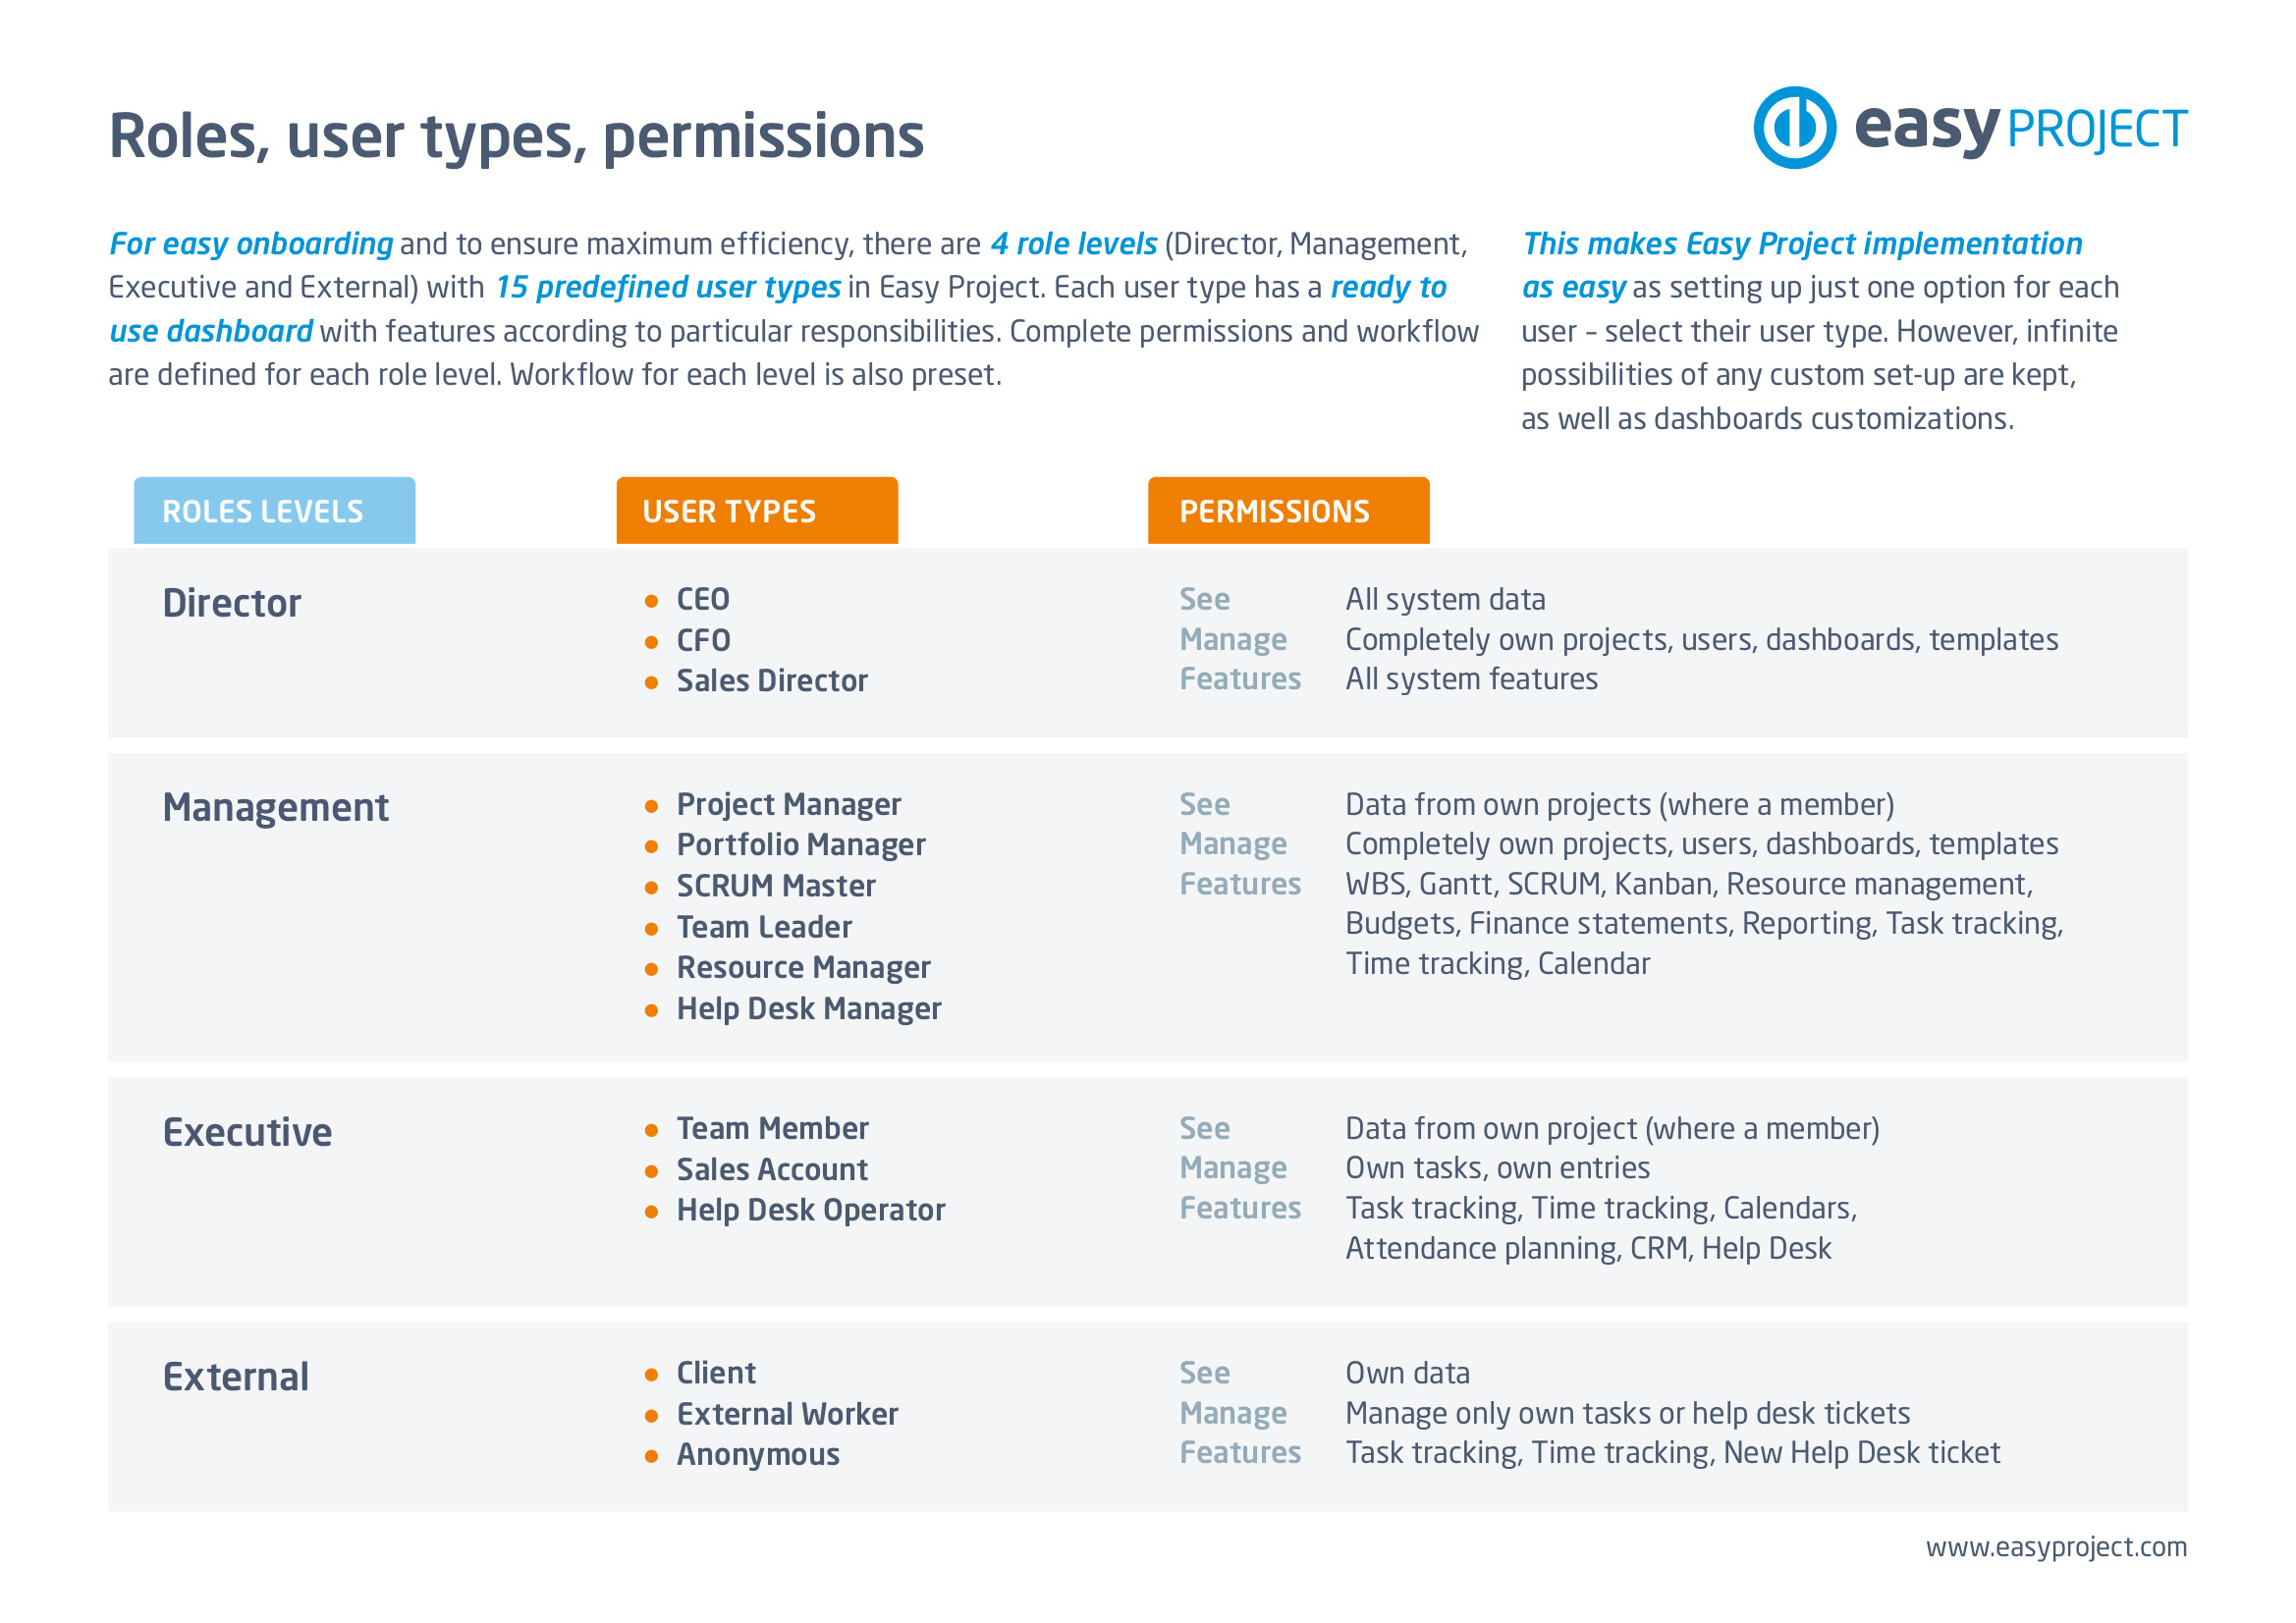 Easy Project – Global roles by user types